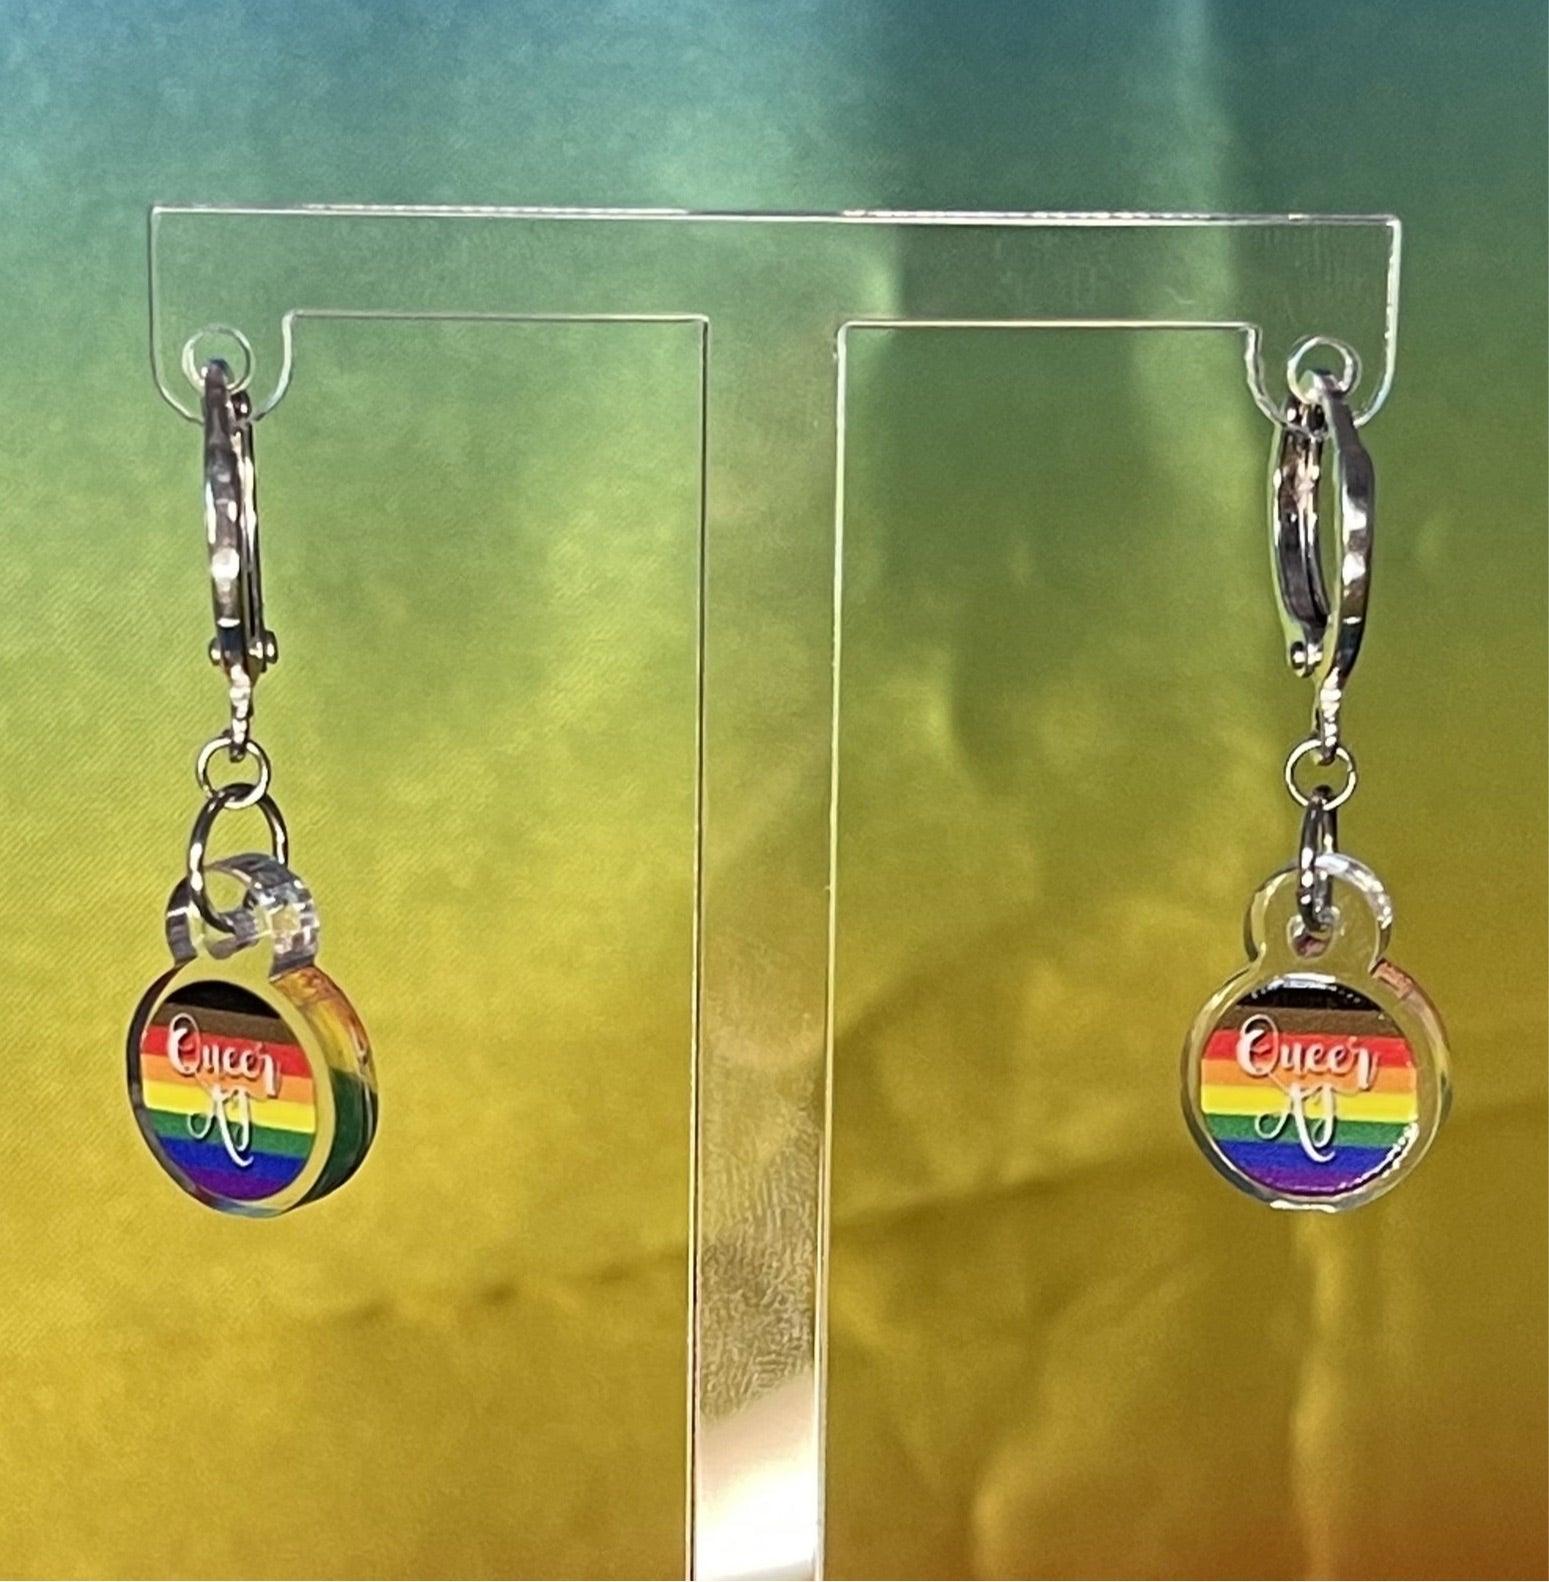 Queer AF Pride Flag Inspired Earrings - Lxyclr Authentic